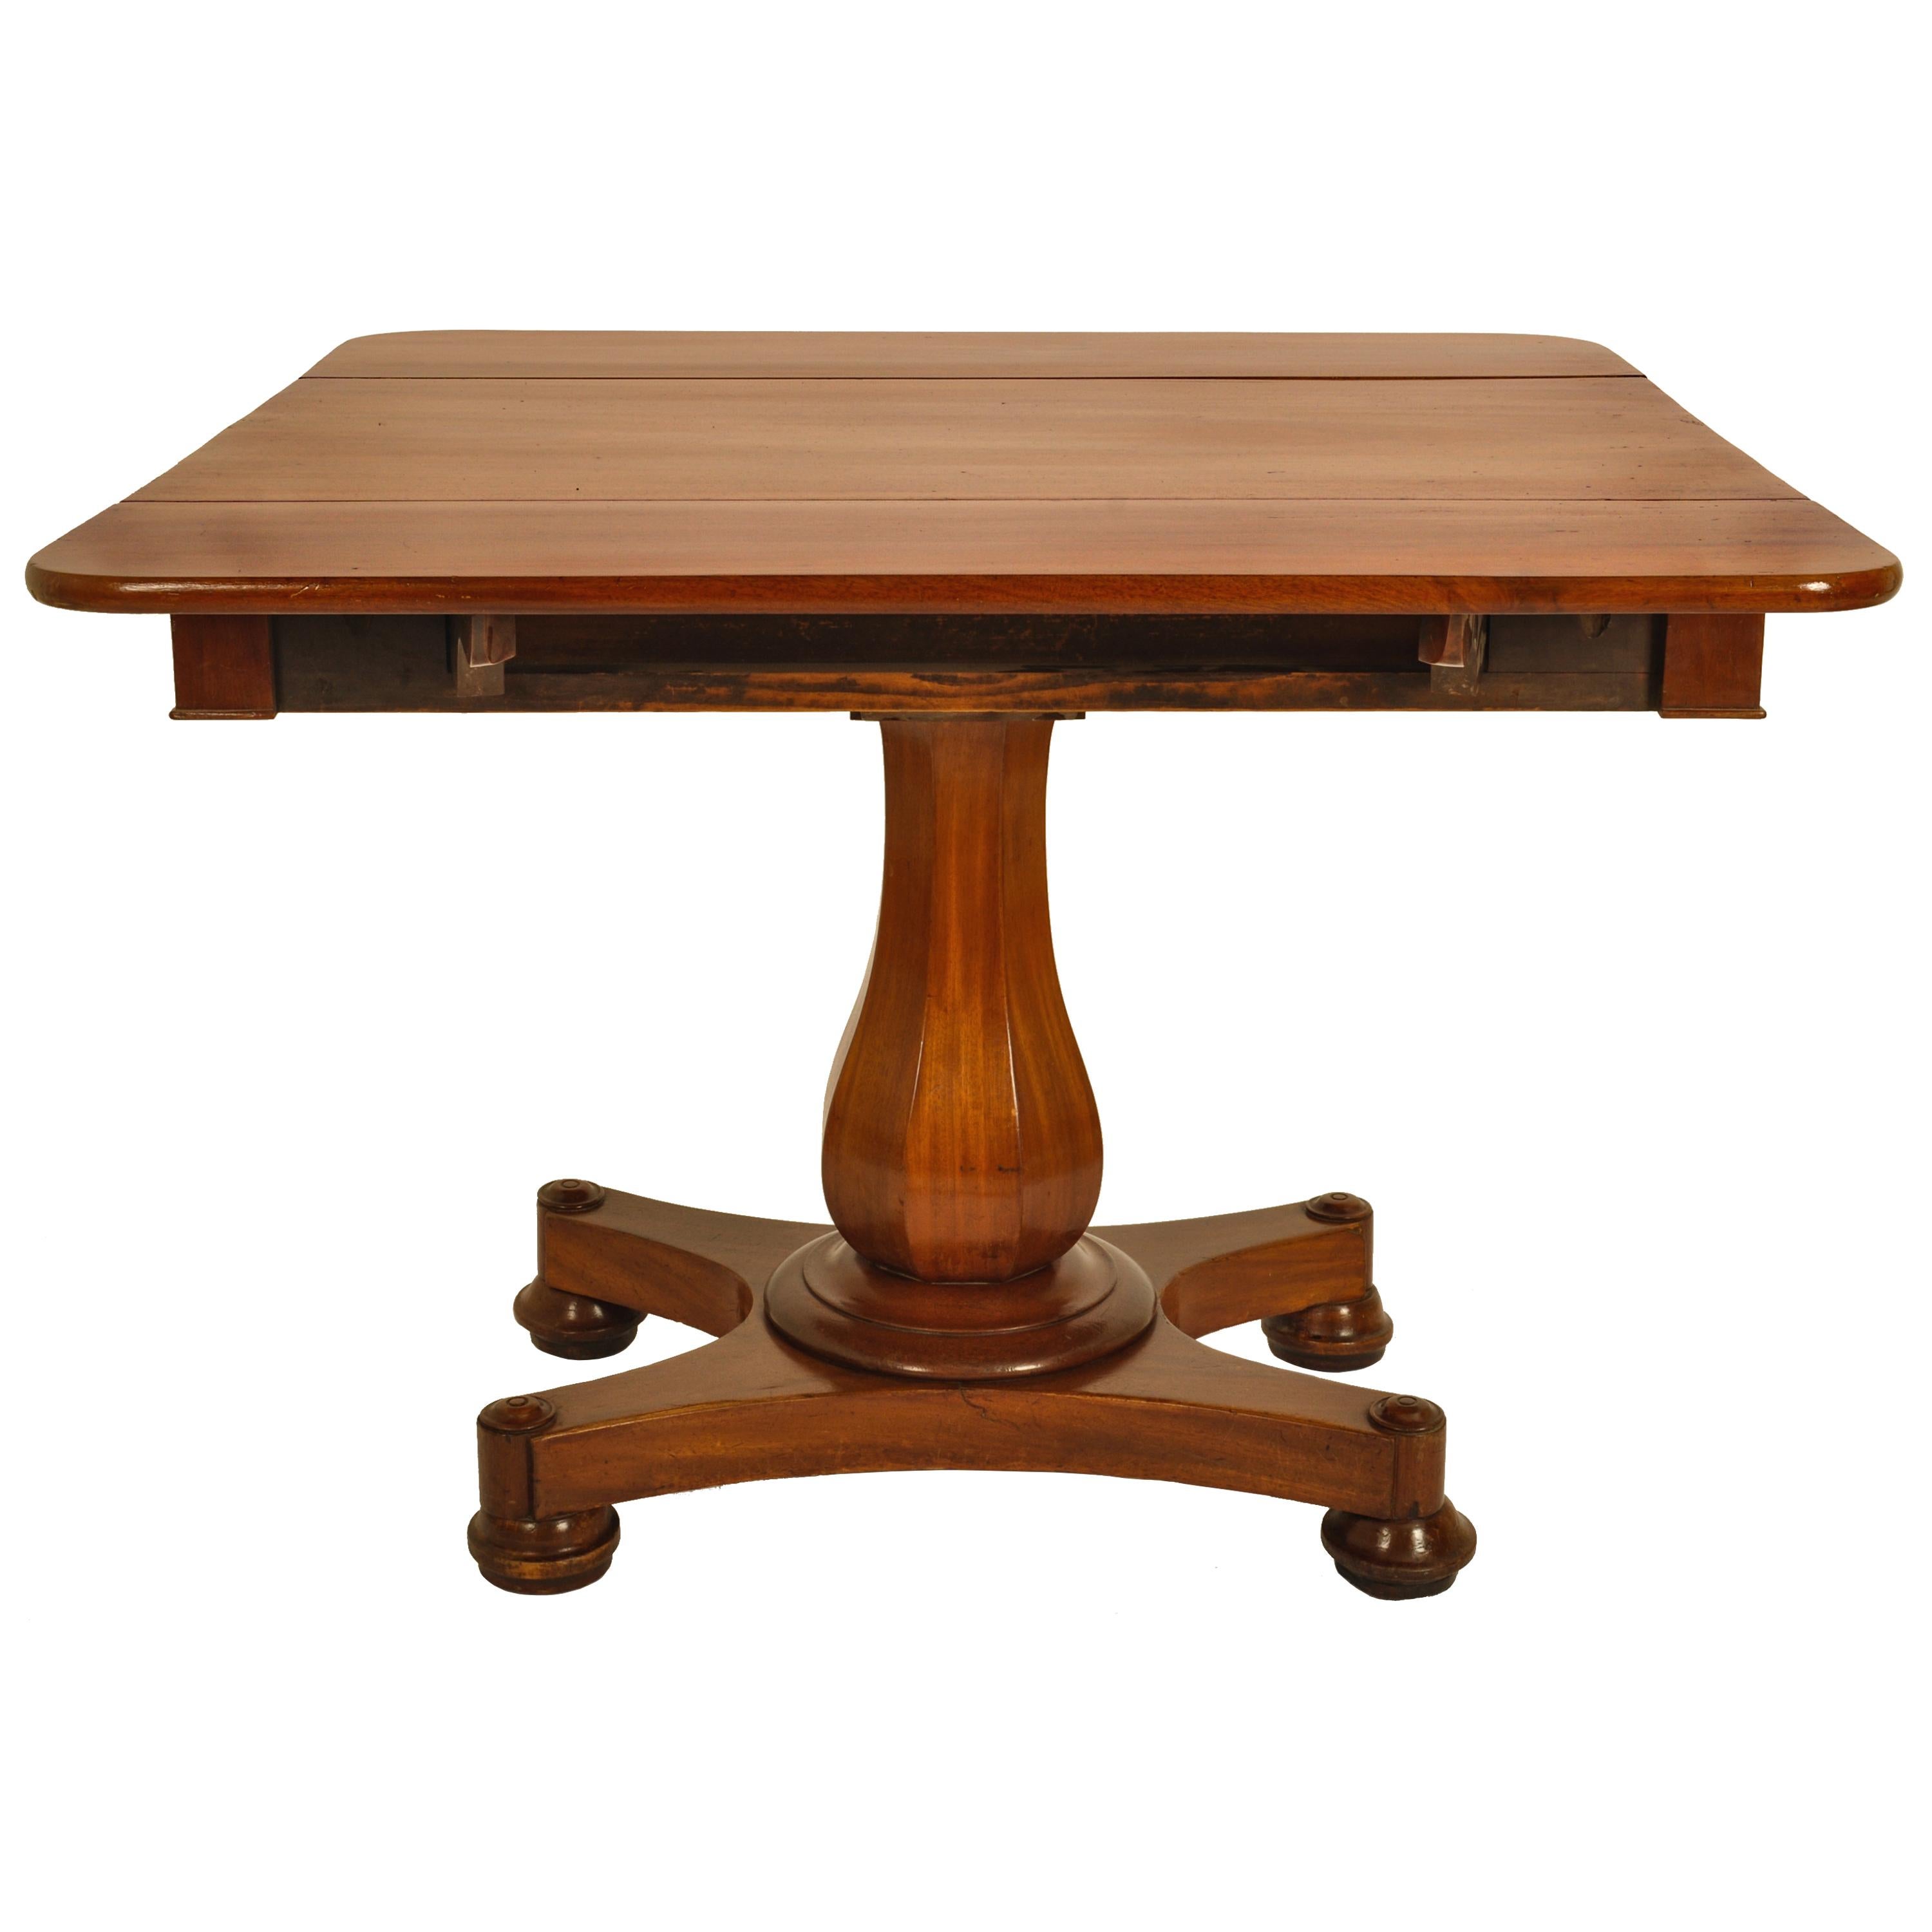 19th Century Antique American Empire Mahogany Drop Leaf Pedestal Pembroke Table Maryland 1840 For Sale